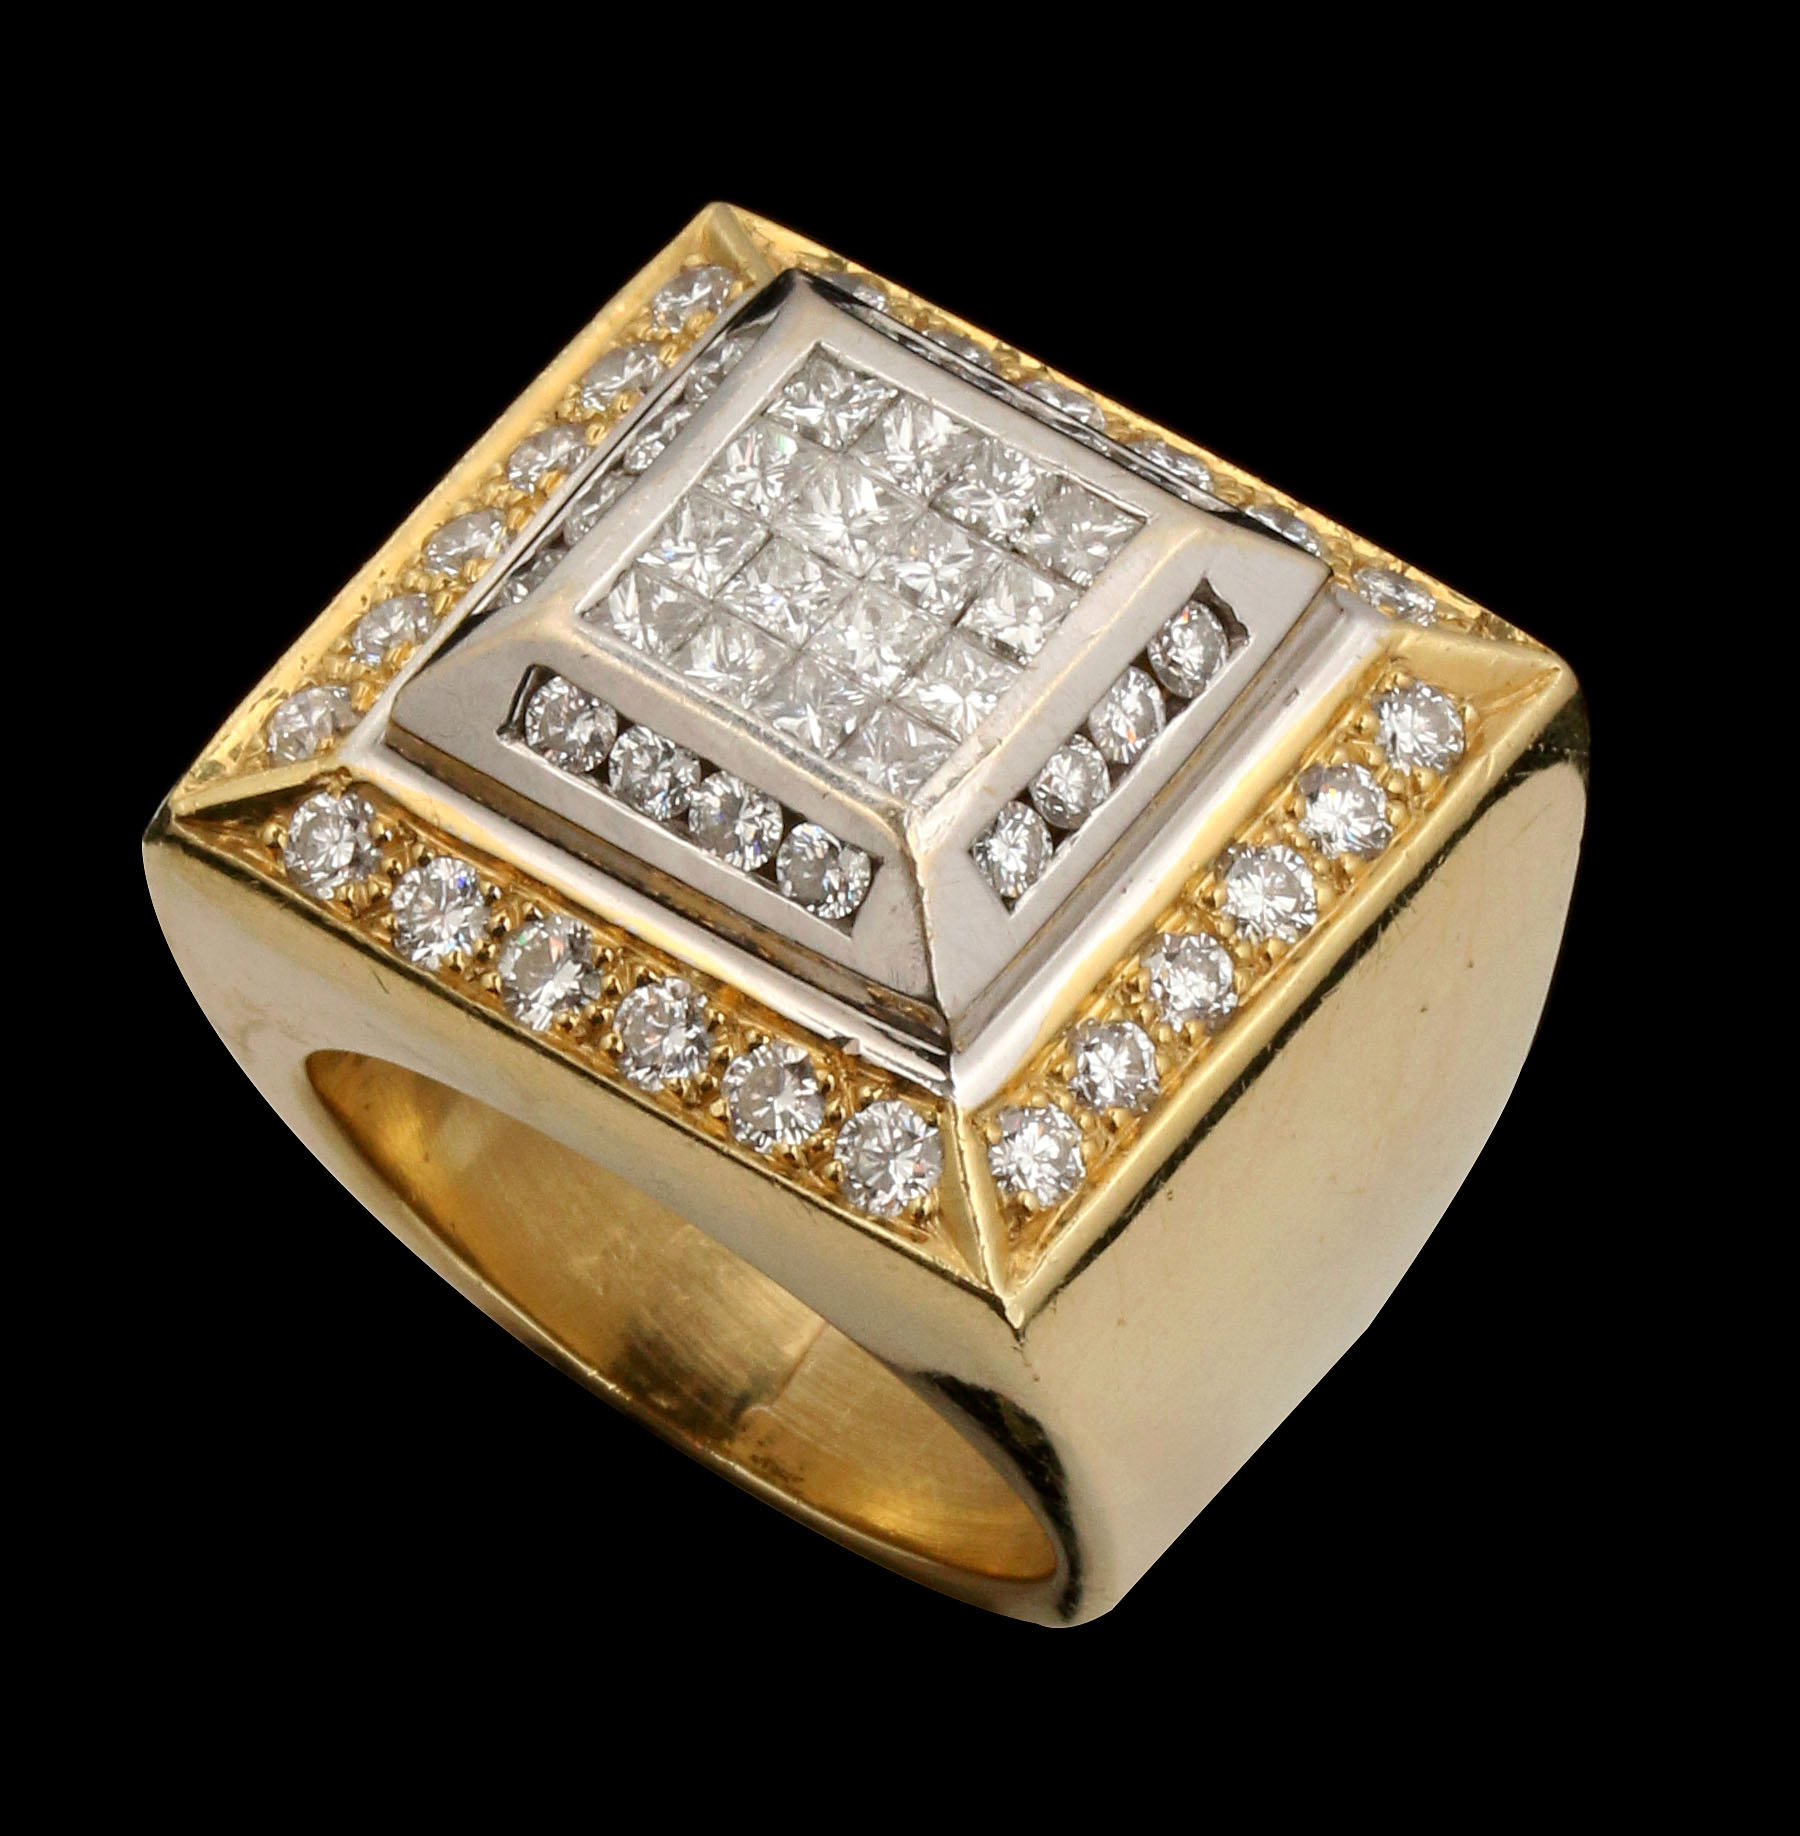 A GENT'S 18K DIAMOND RING APPROX 4.8 CARATS TOTAL 